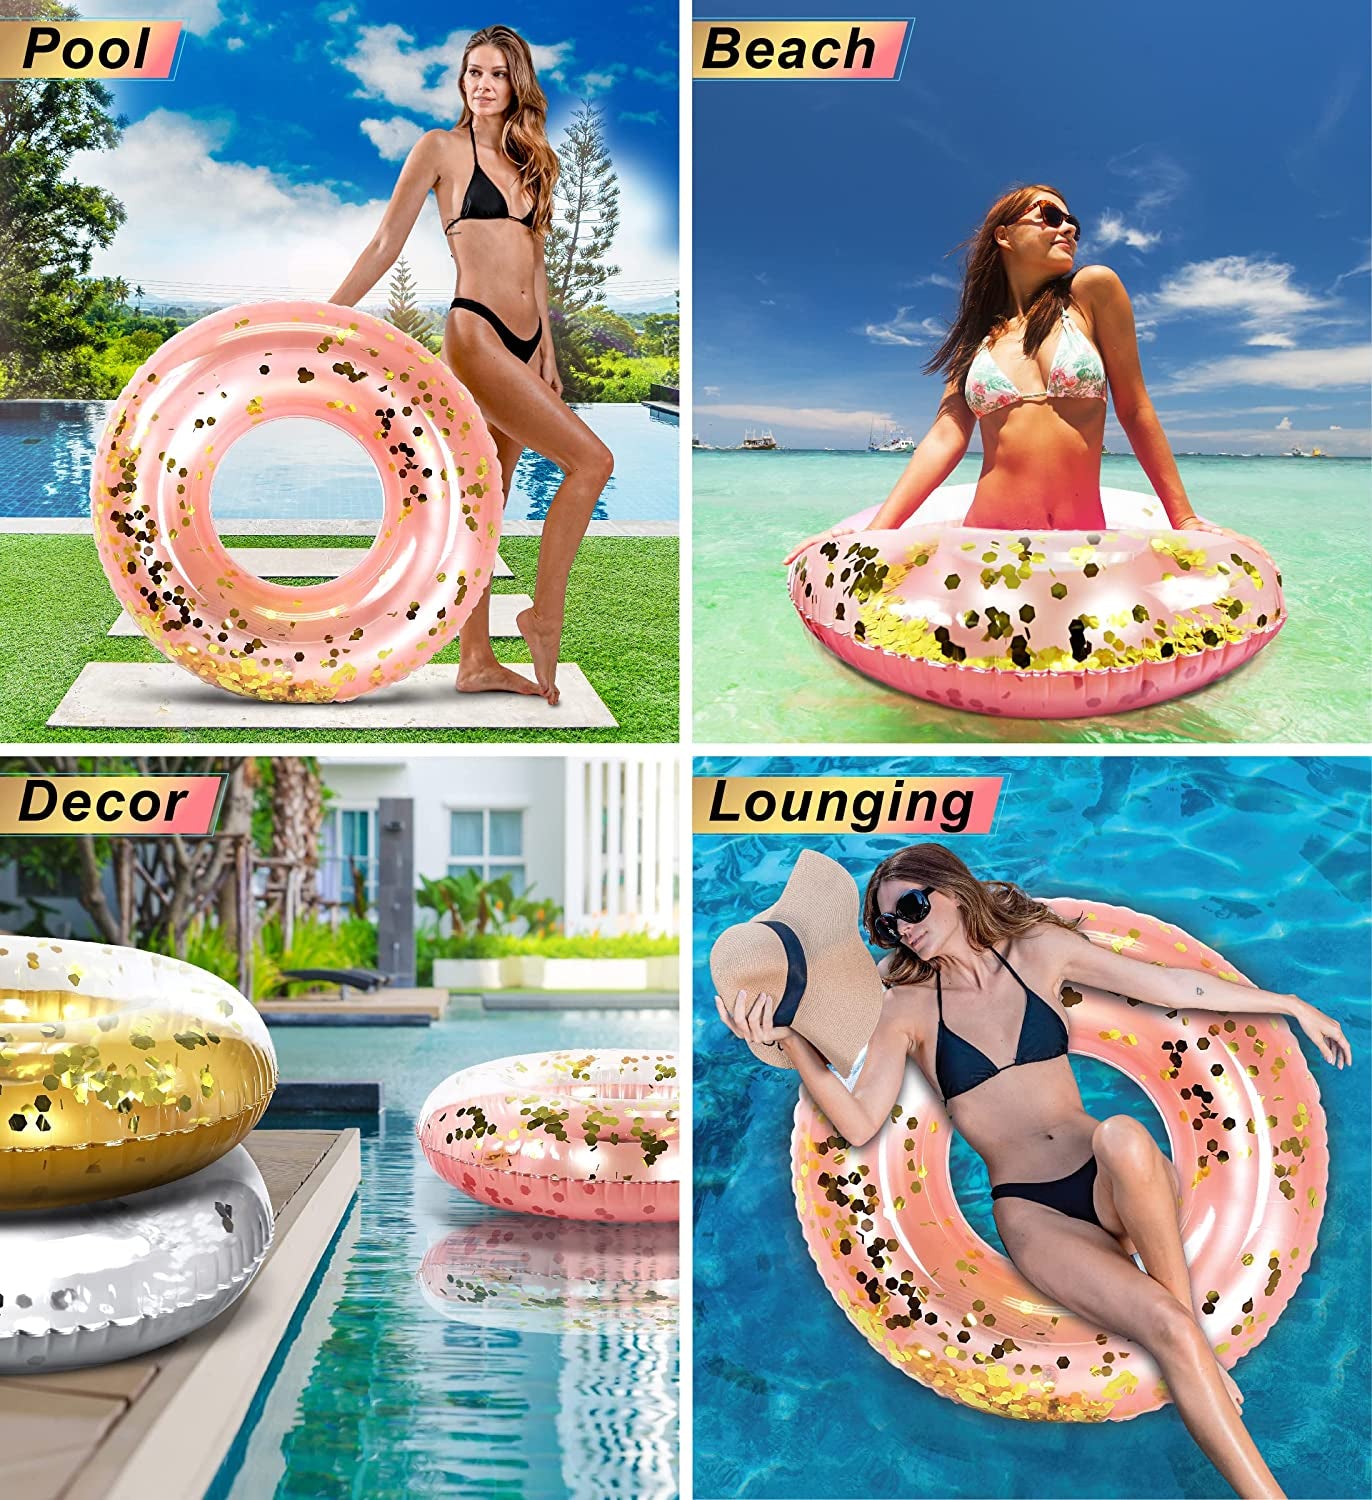  Inflatable Pool Float Tube Confetti 36 Inches Premium Swim Ring Heavy Duty Vinyl Flotation Pool Floats Toy for The Beach, Party, Vacation, UV Resistant - Pool Party